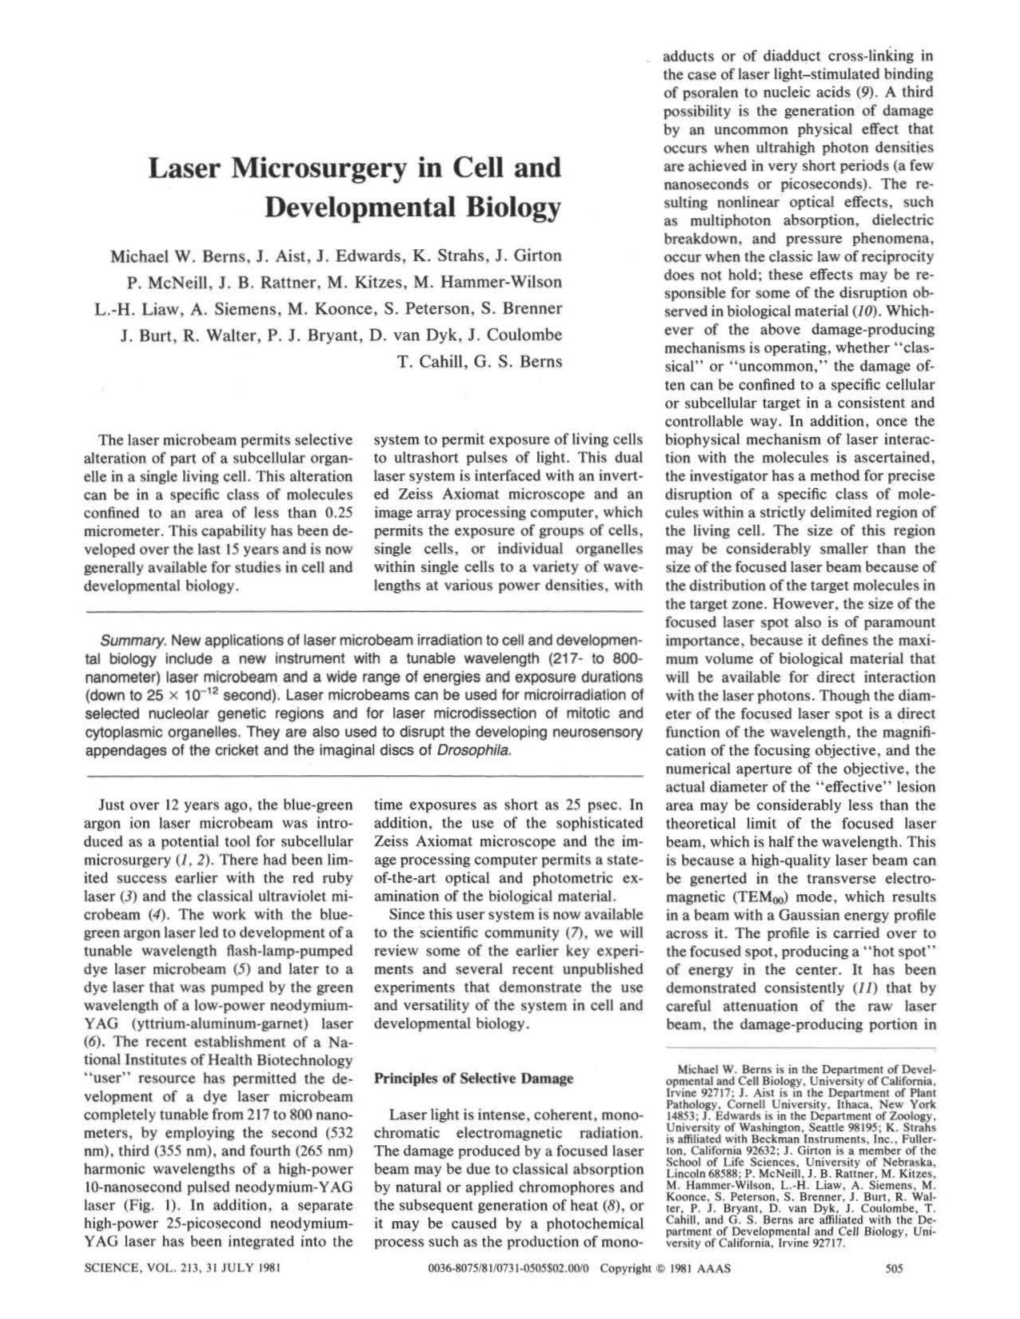 Laser Microsurgery in Cell and Developmental Biology